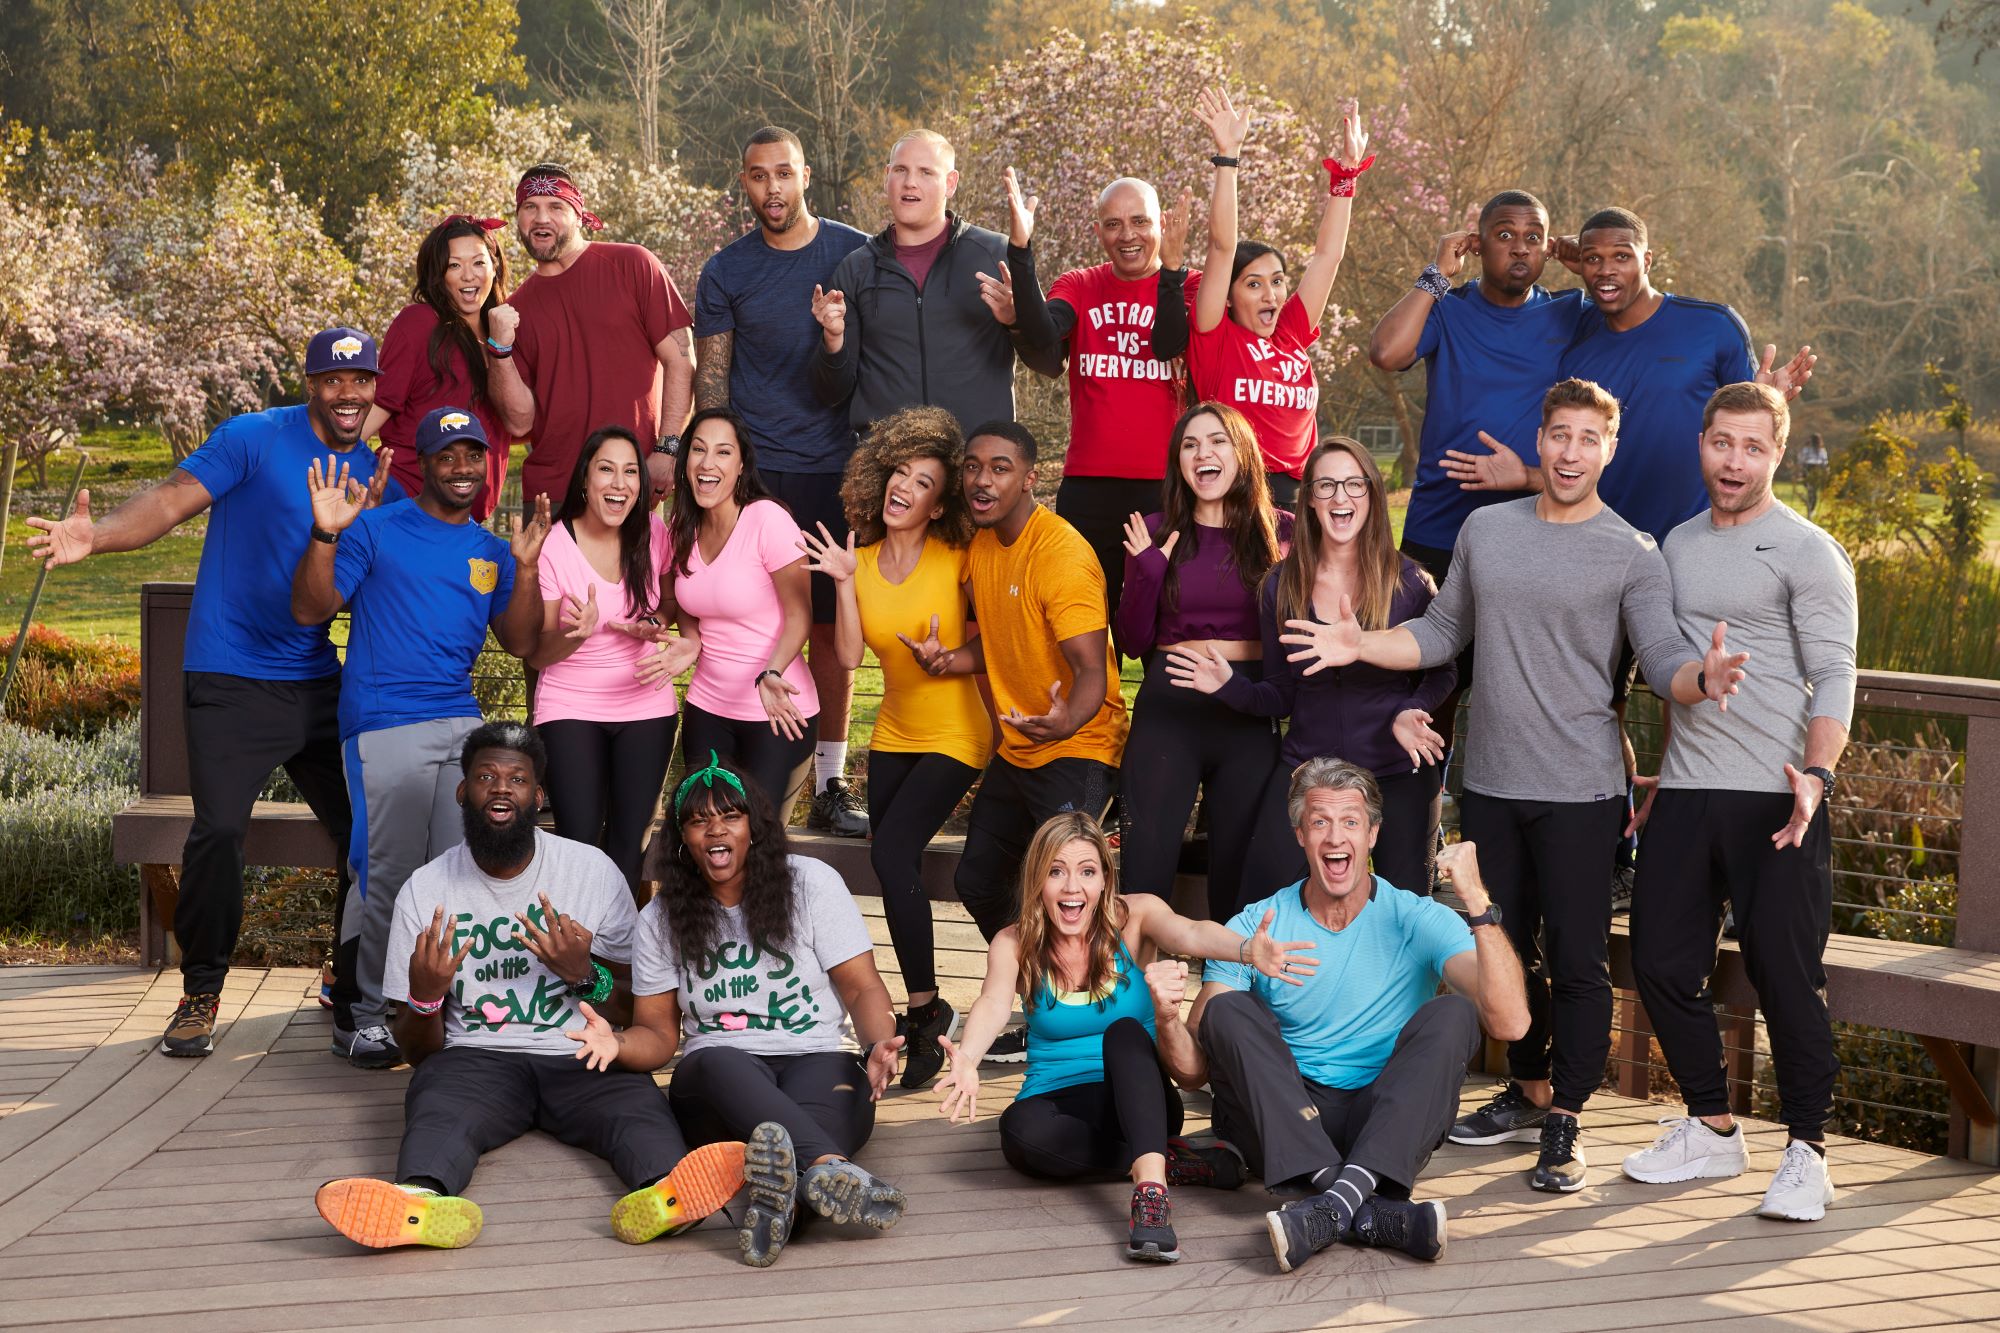 'The Amazing Race' Season 33 What to Expect From the Finale